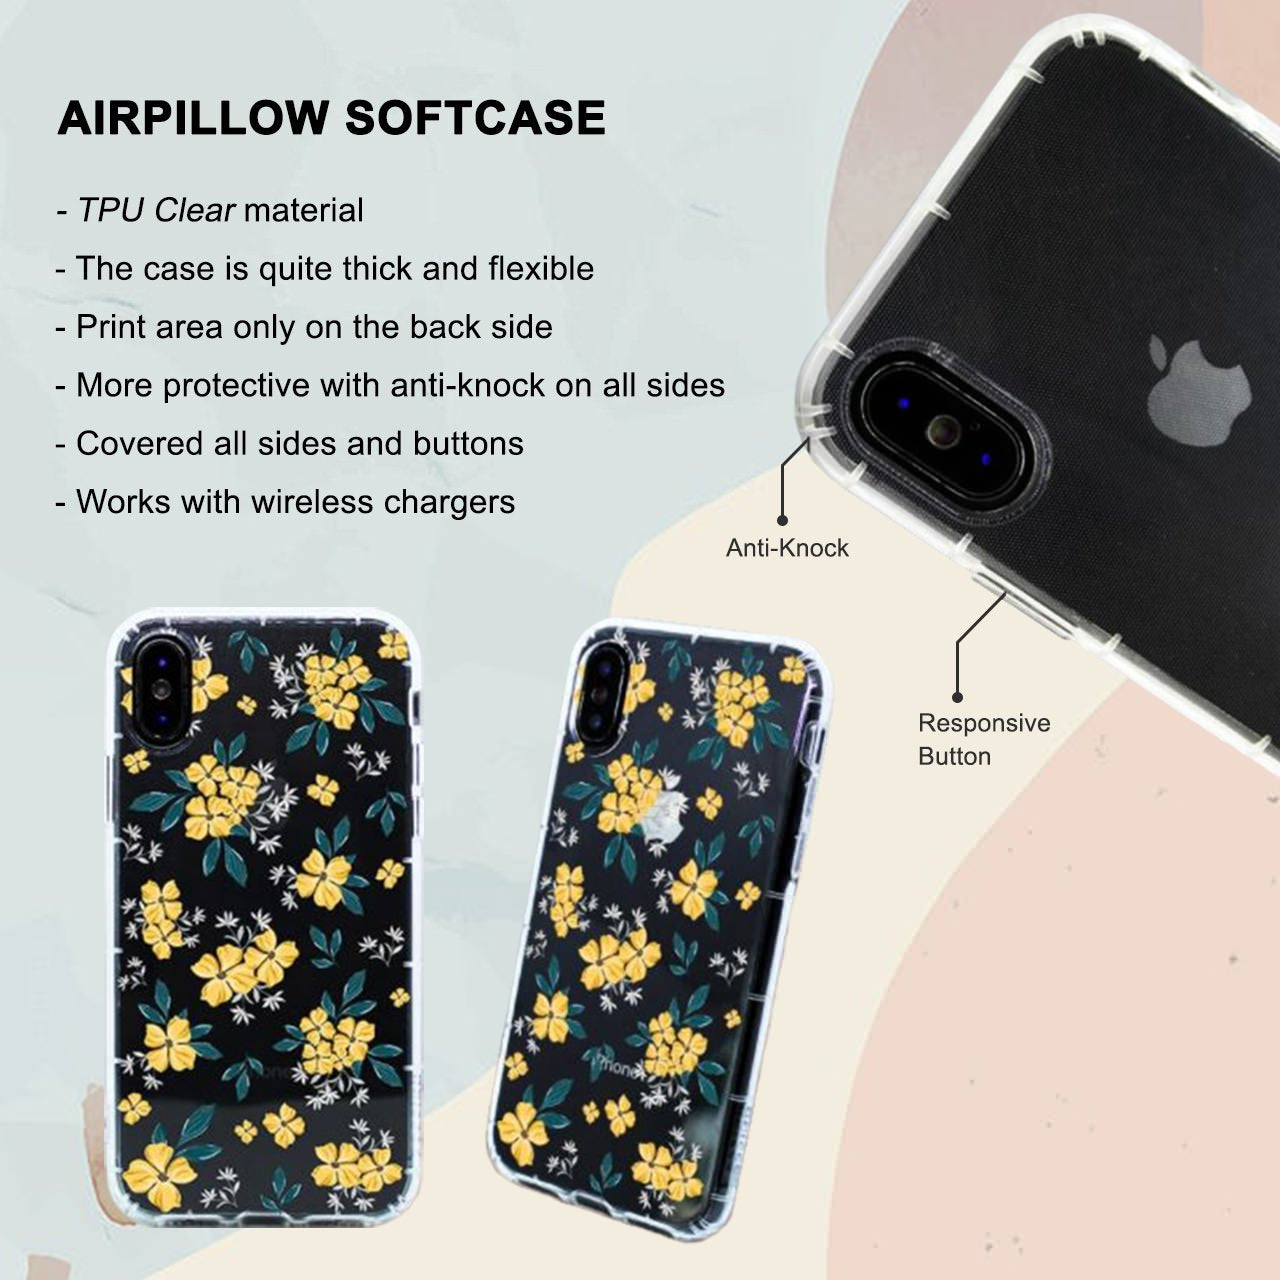 Beauty of Galaxy iPhone 6 / 6s Plus Case